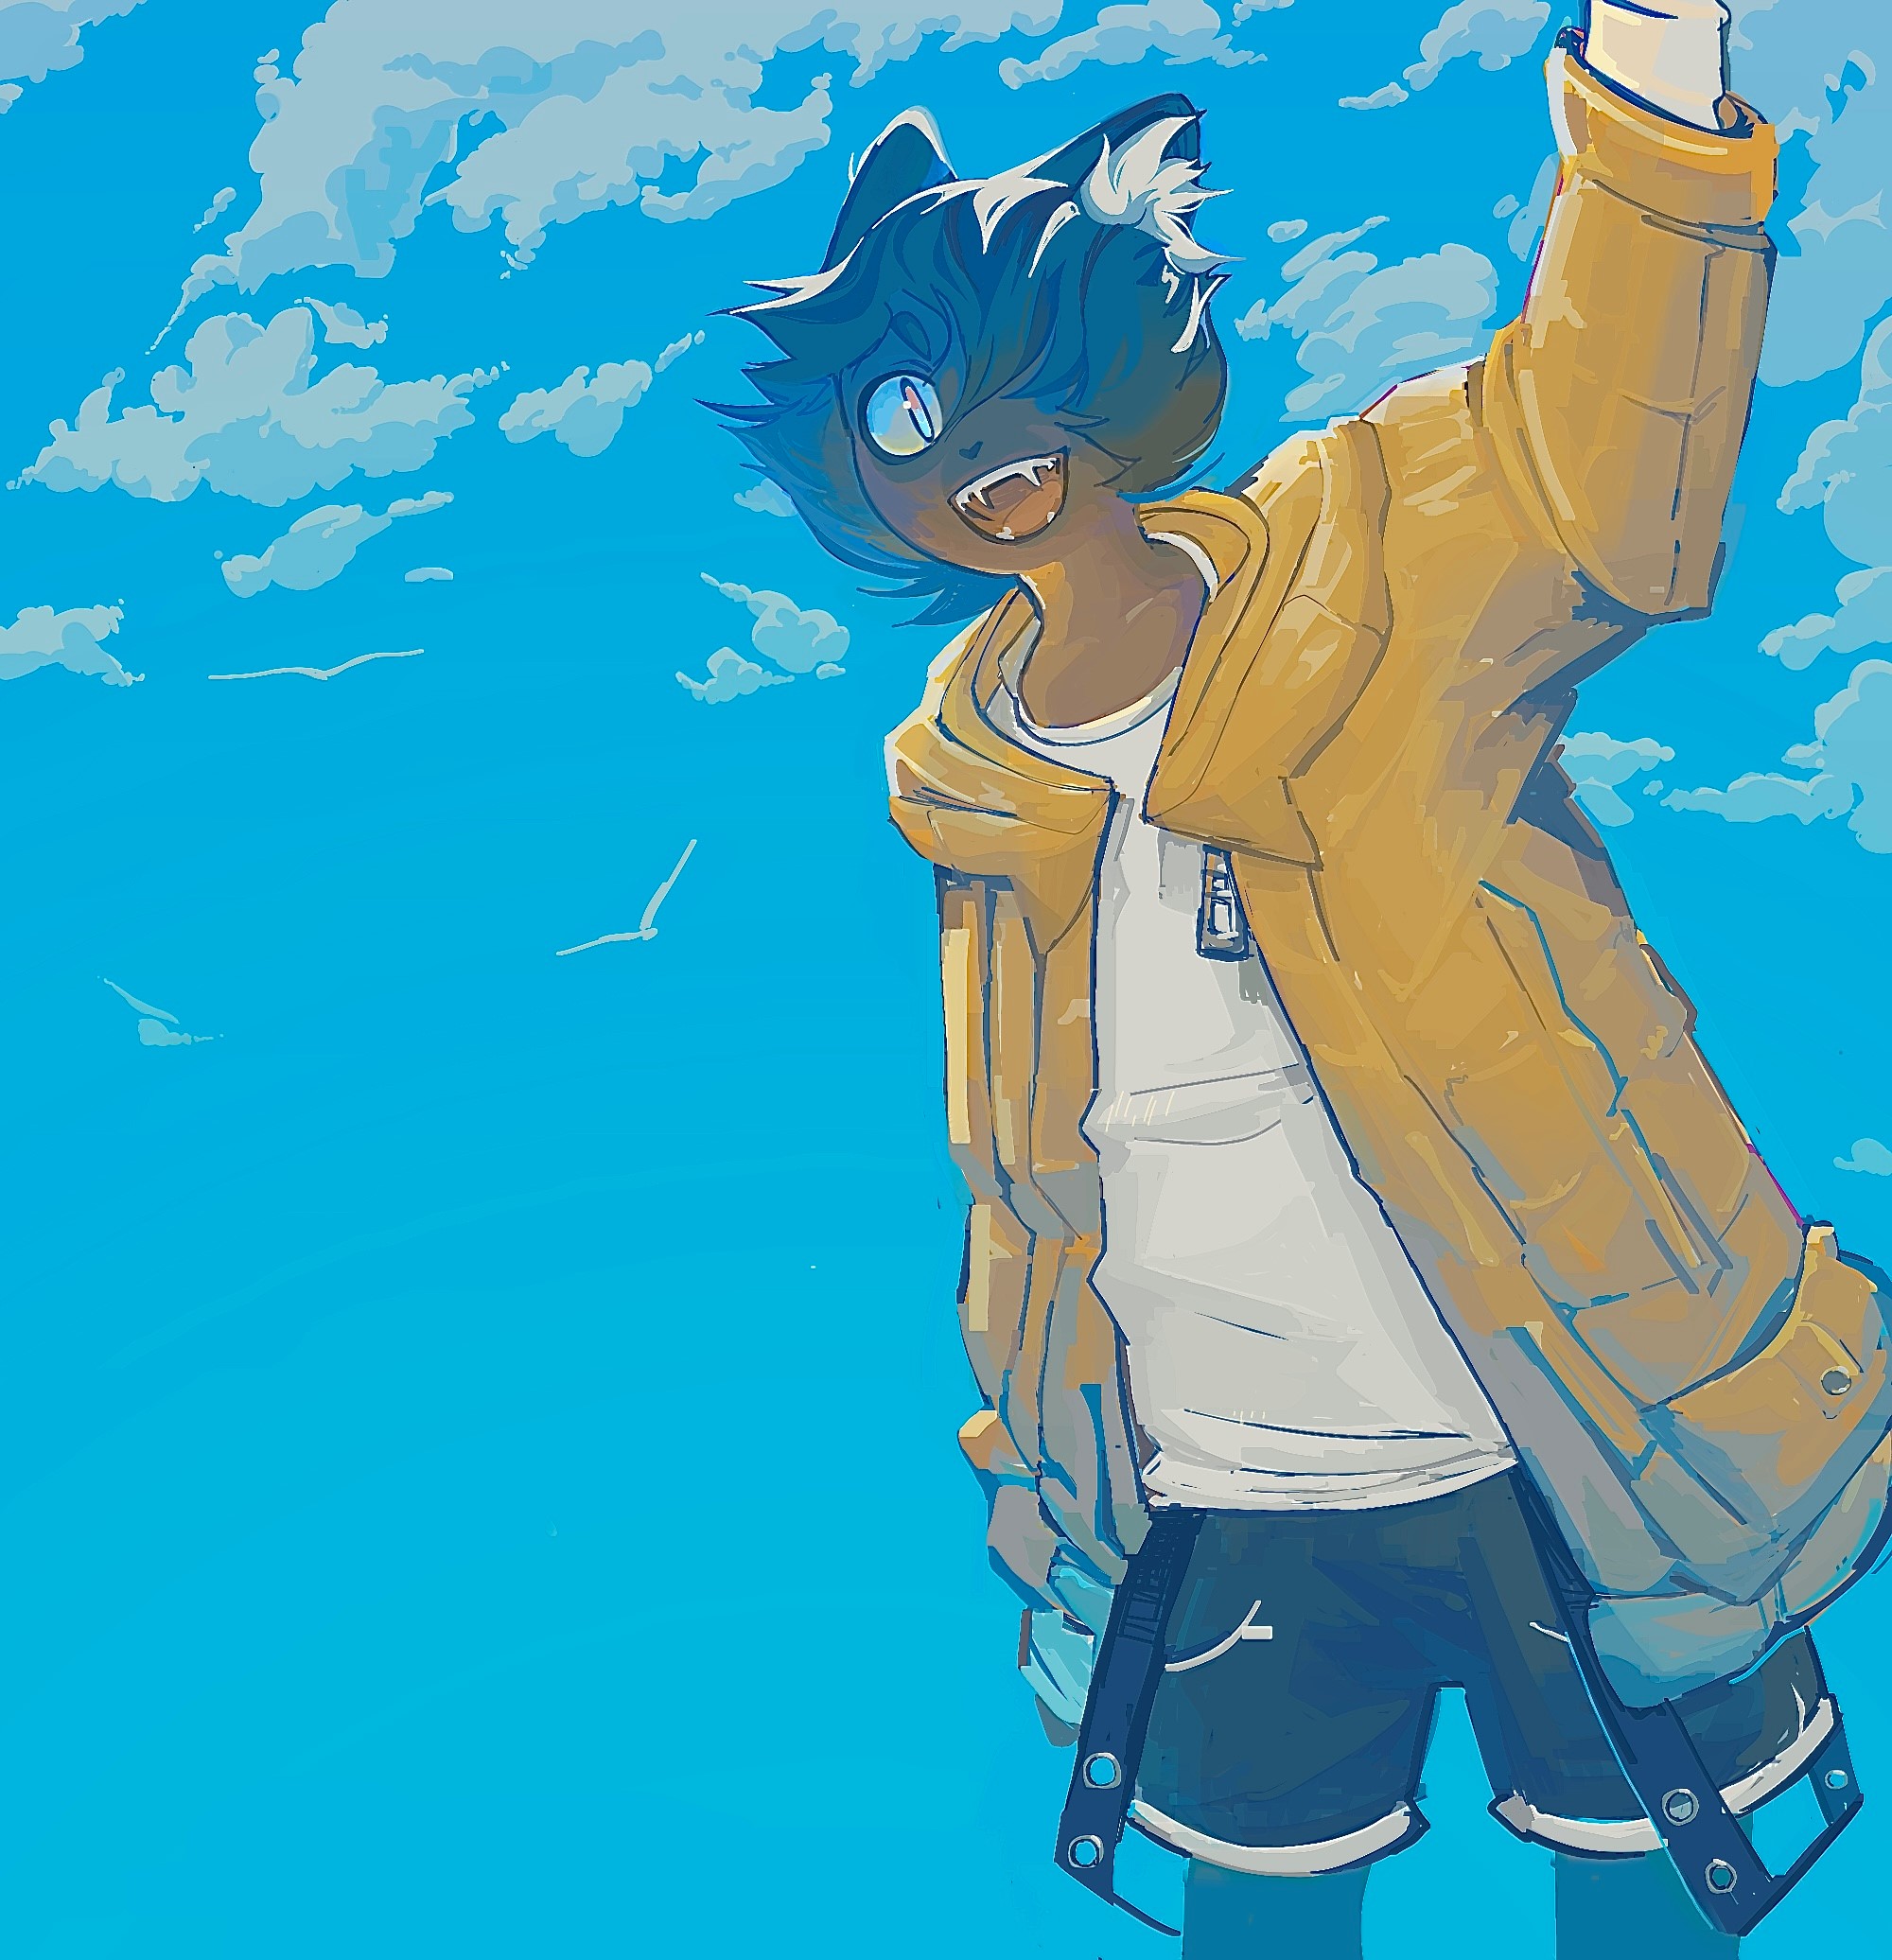 Artwork of a character waving and a blue sky in the background